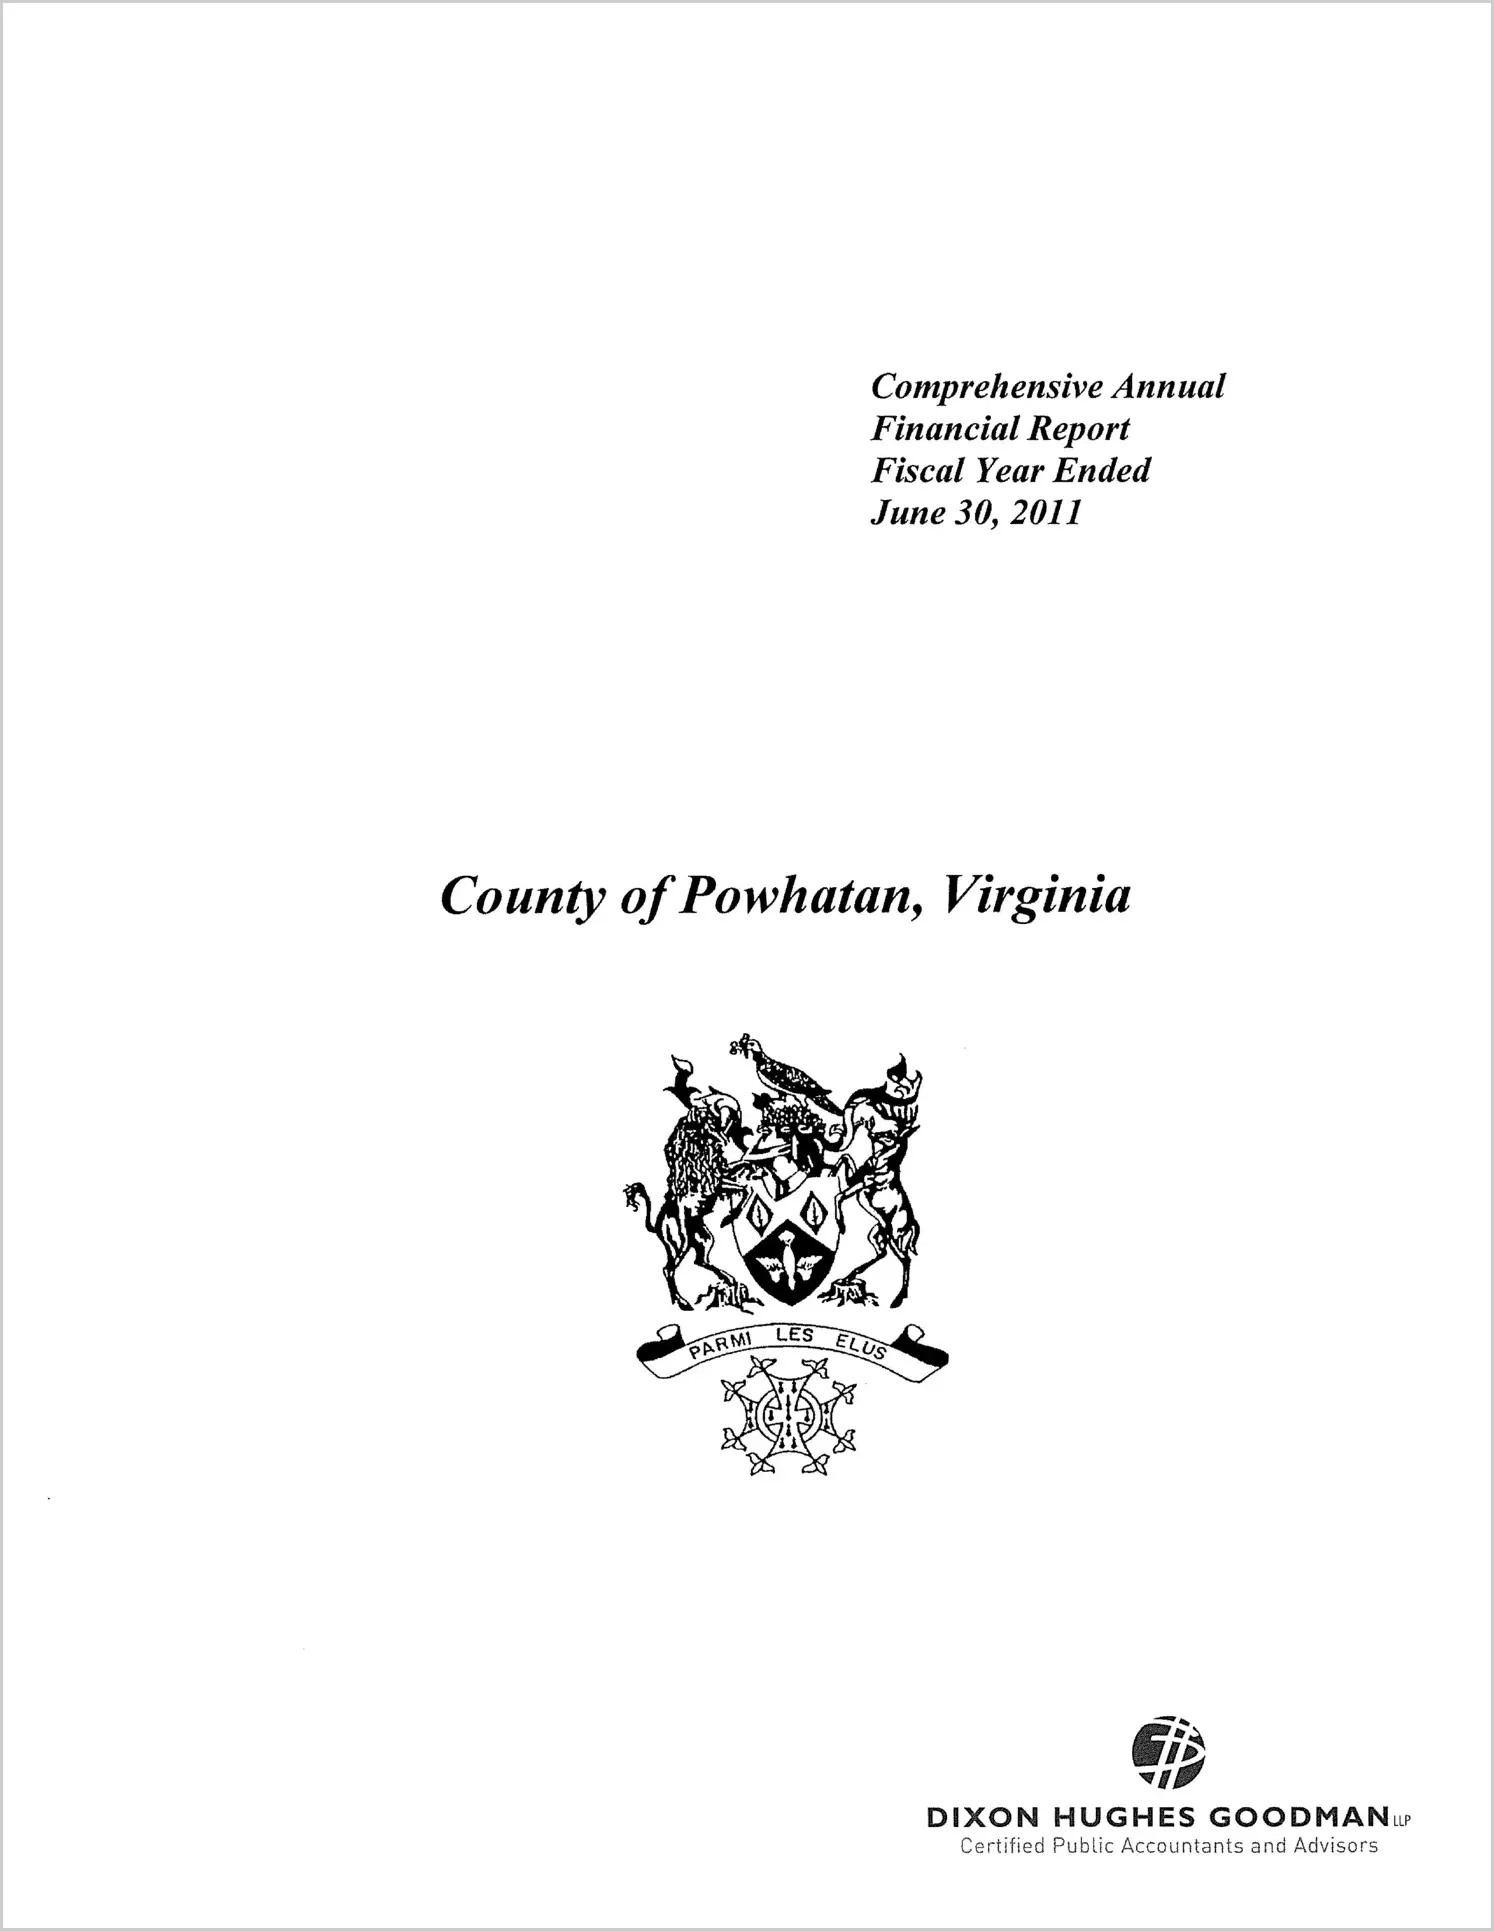 2011 Annual Financial Report for County of Powhatan